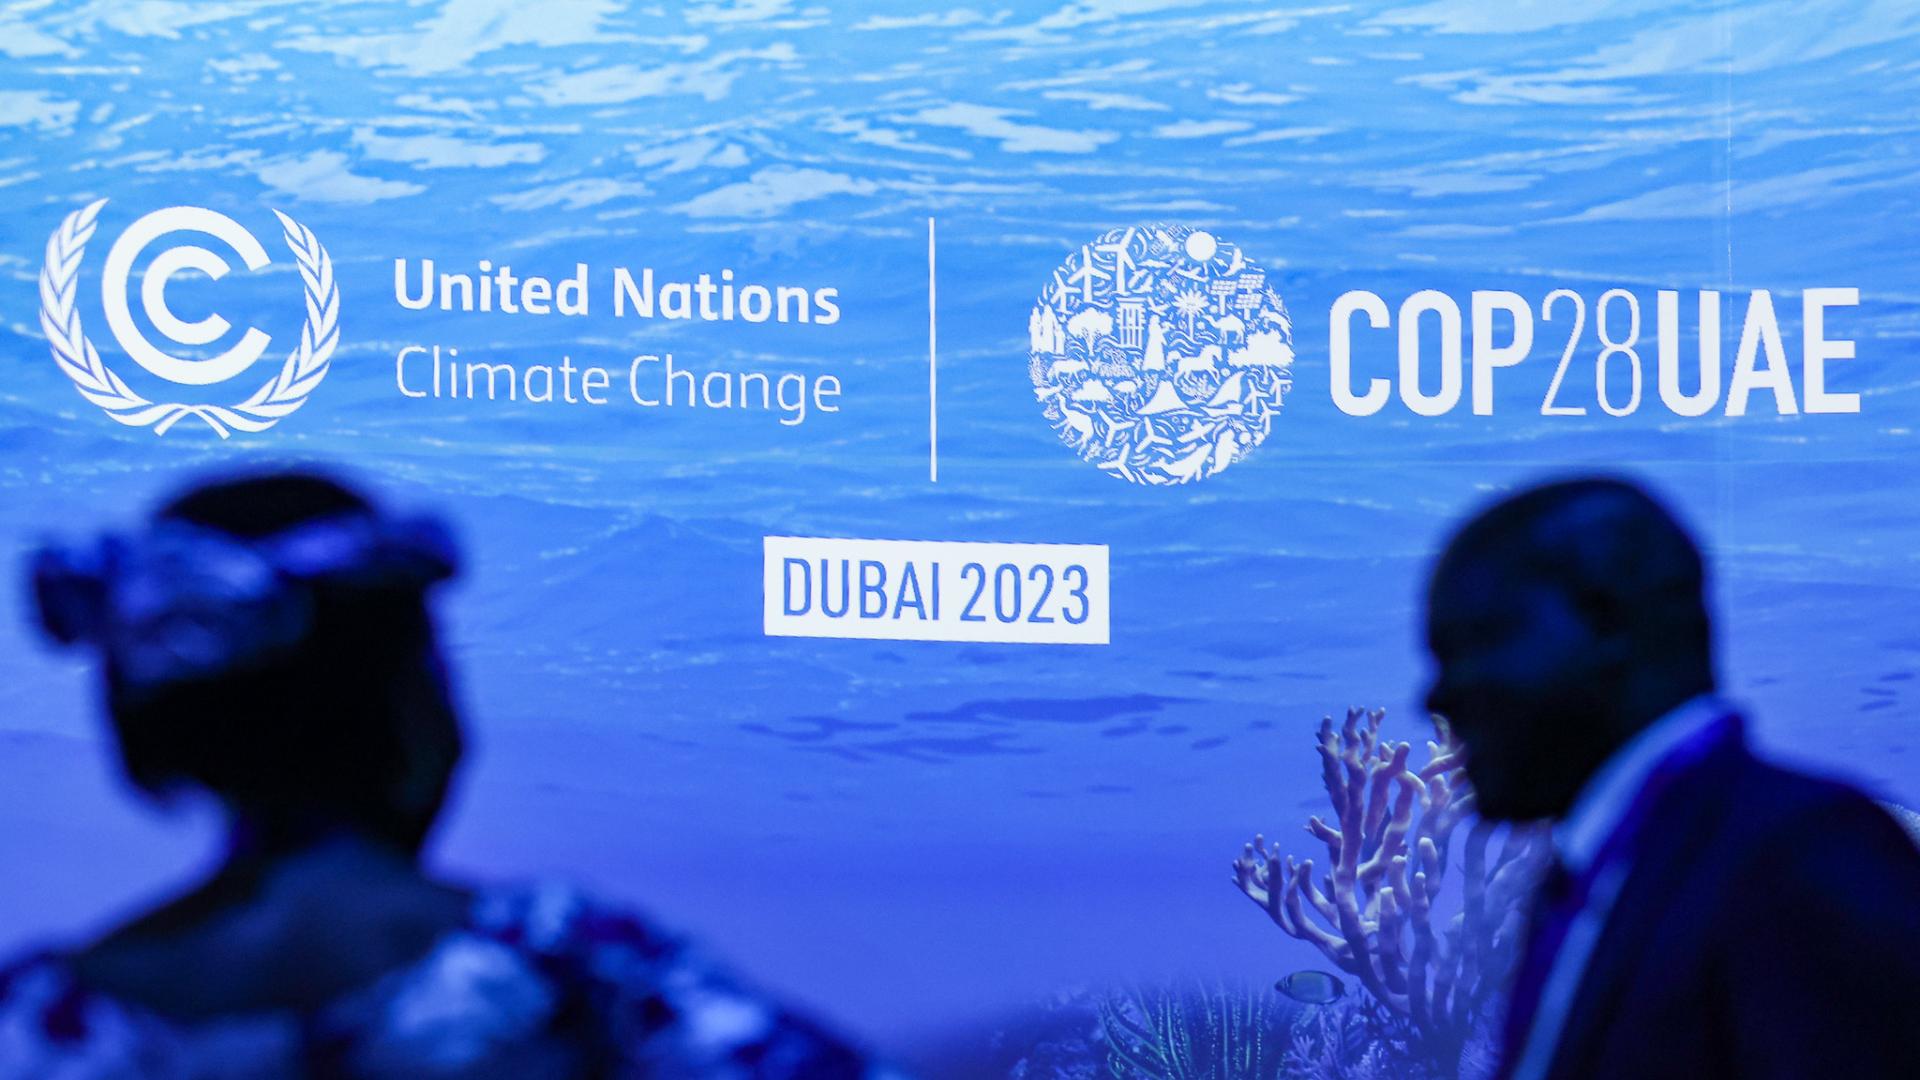 The COP28 logo on a blue sea background with the figures of two people in front